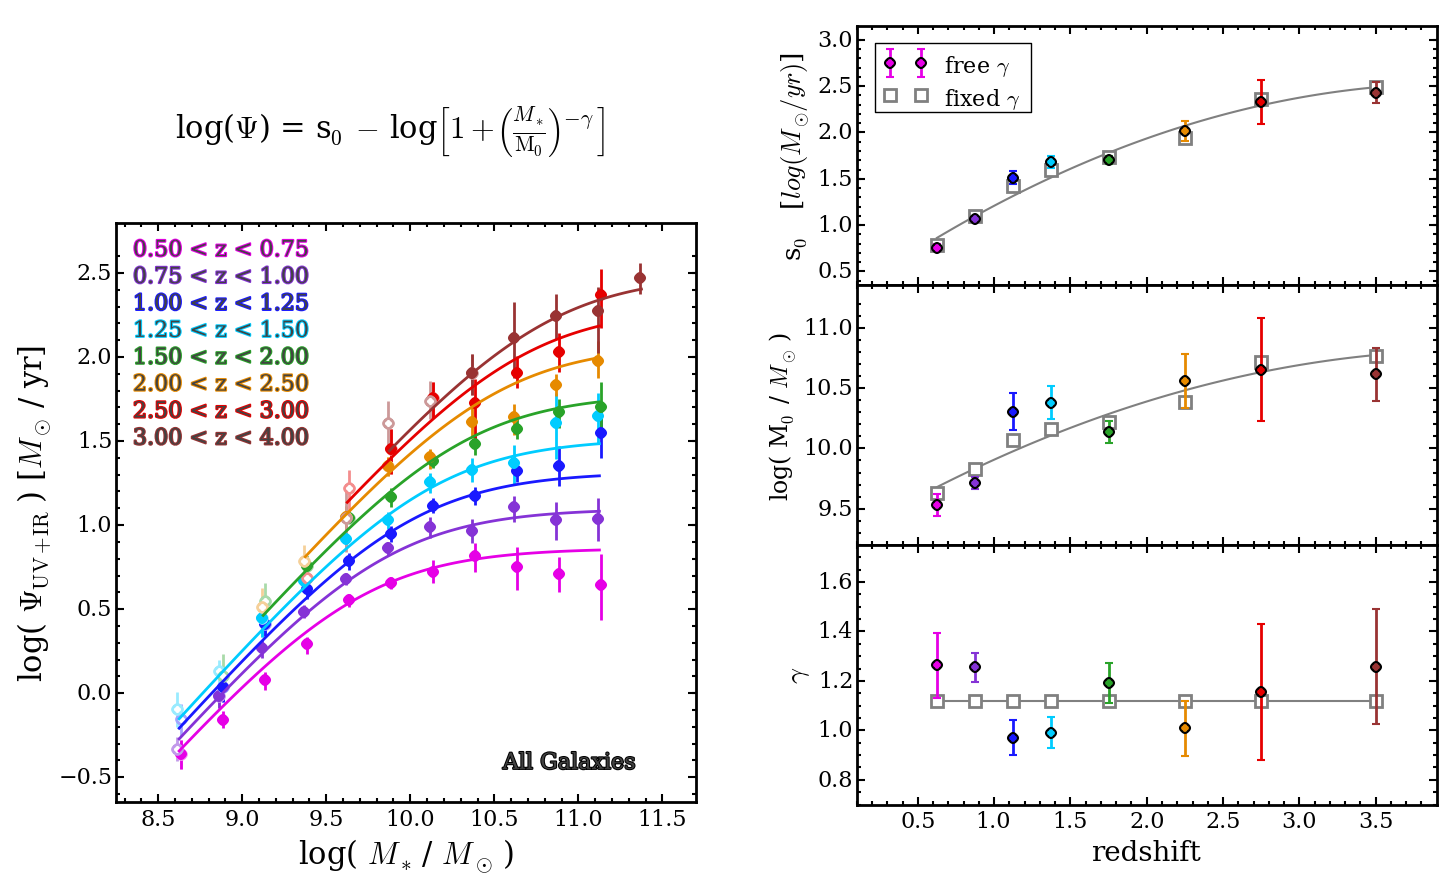 Parameterization for the redshift evolution of the SFR-M* sequence of all galaxies.